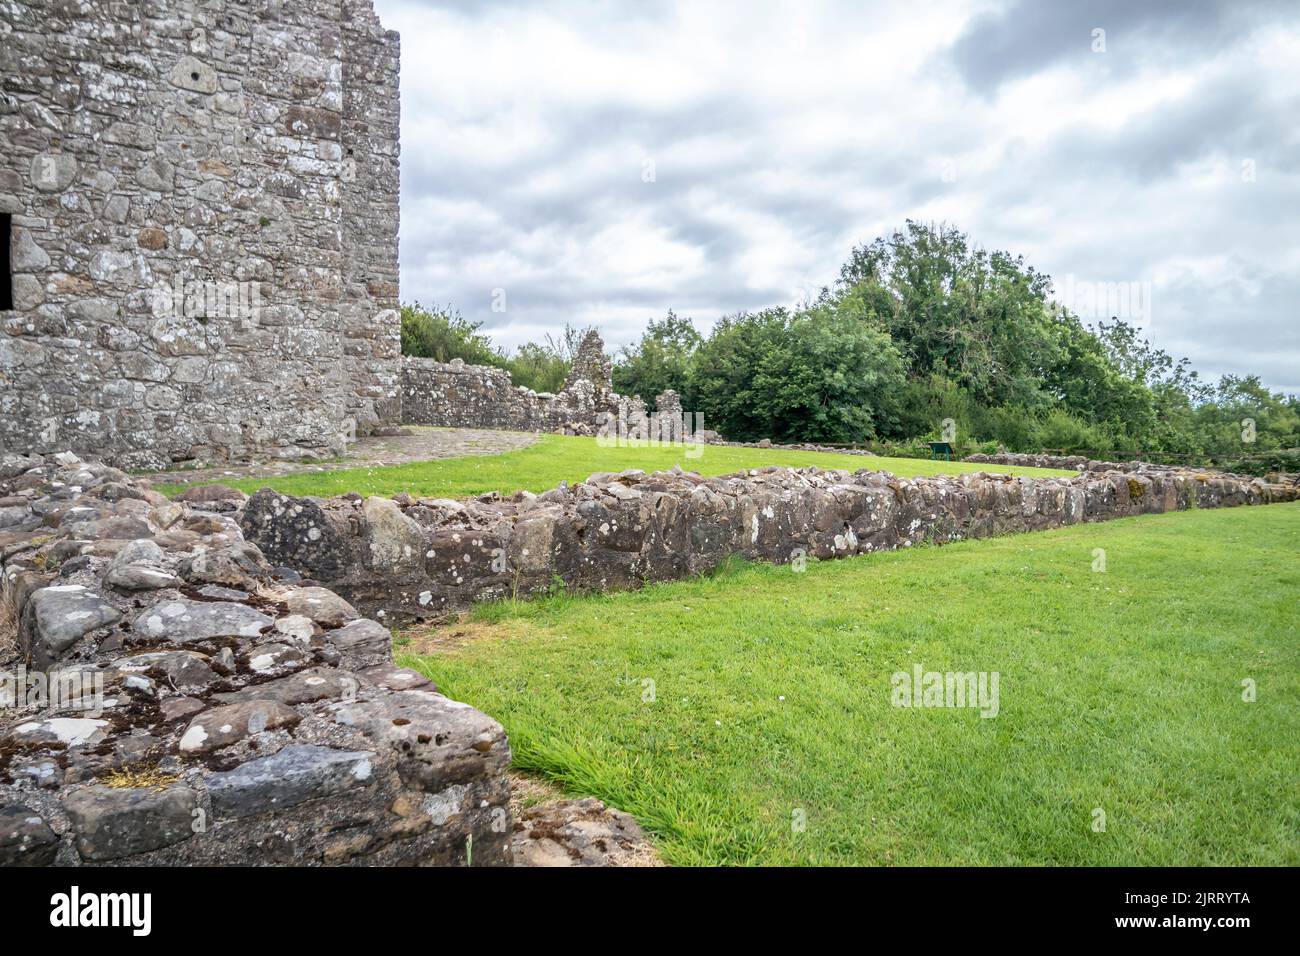 The beautiful Tully Castle by Enniskillen, County Fermanagh inNorthern Ireland. Stock Photo